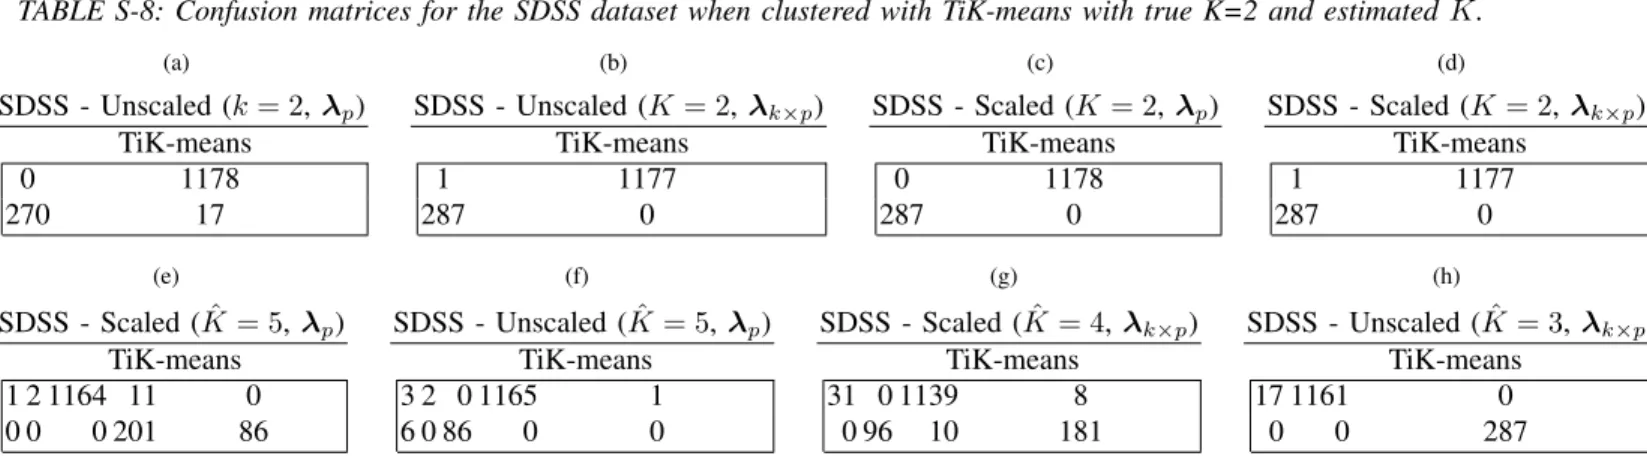 TABLE S-8: Confusion matrices for the SDSS dataset when clustered with TiK-means with true K=2 and estimated ˆ K